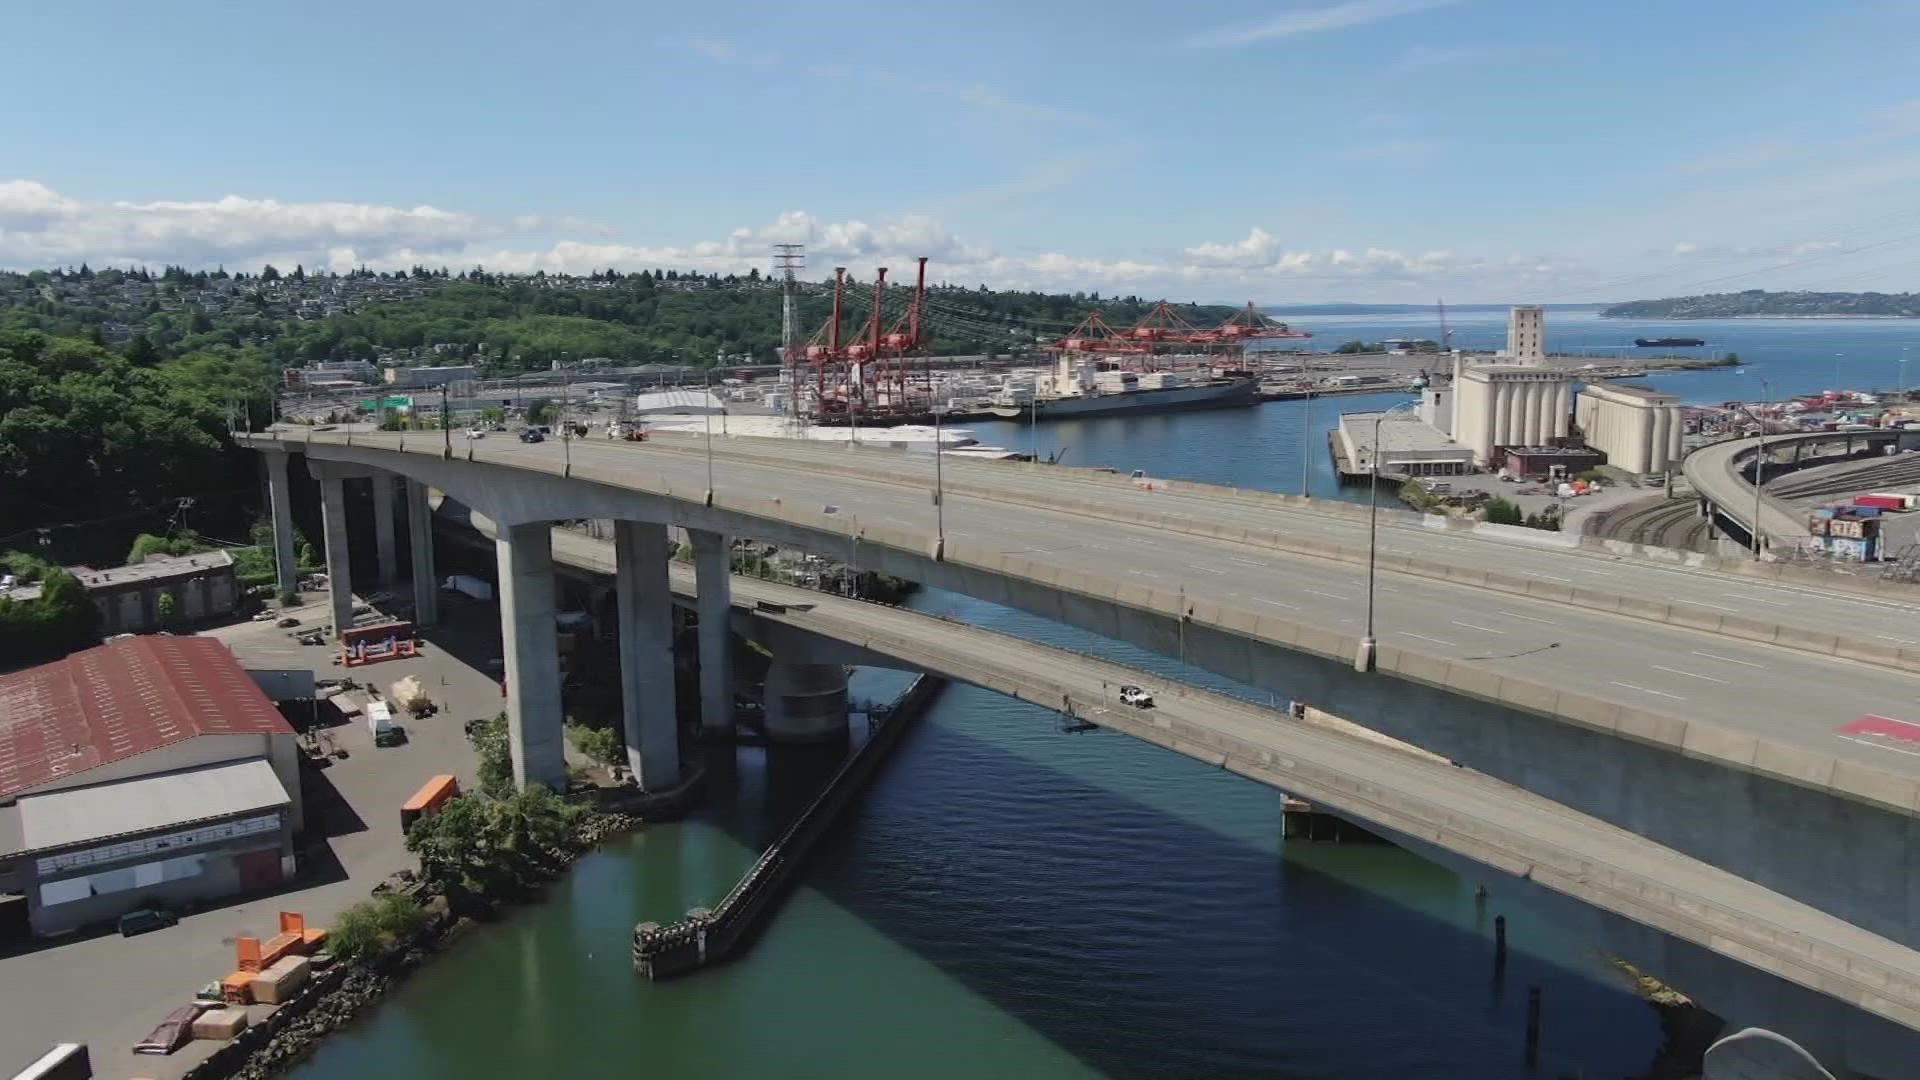 Seattle's Department of Transportation is expected to announce on Thursday an updated timeline for reopening the West Seattle Bridge.